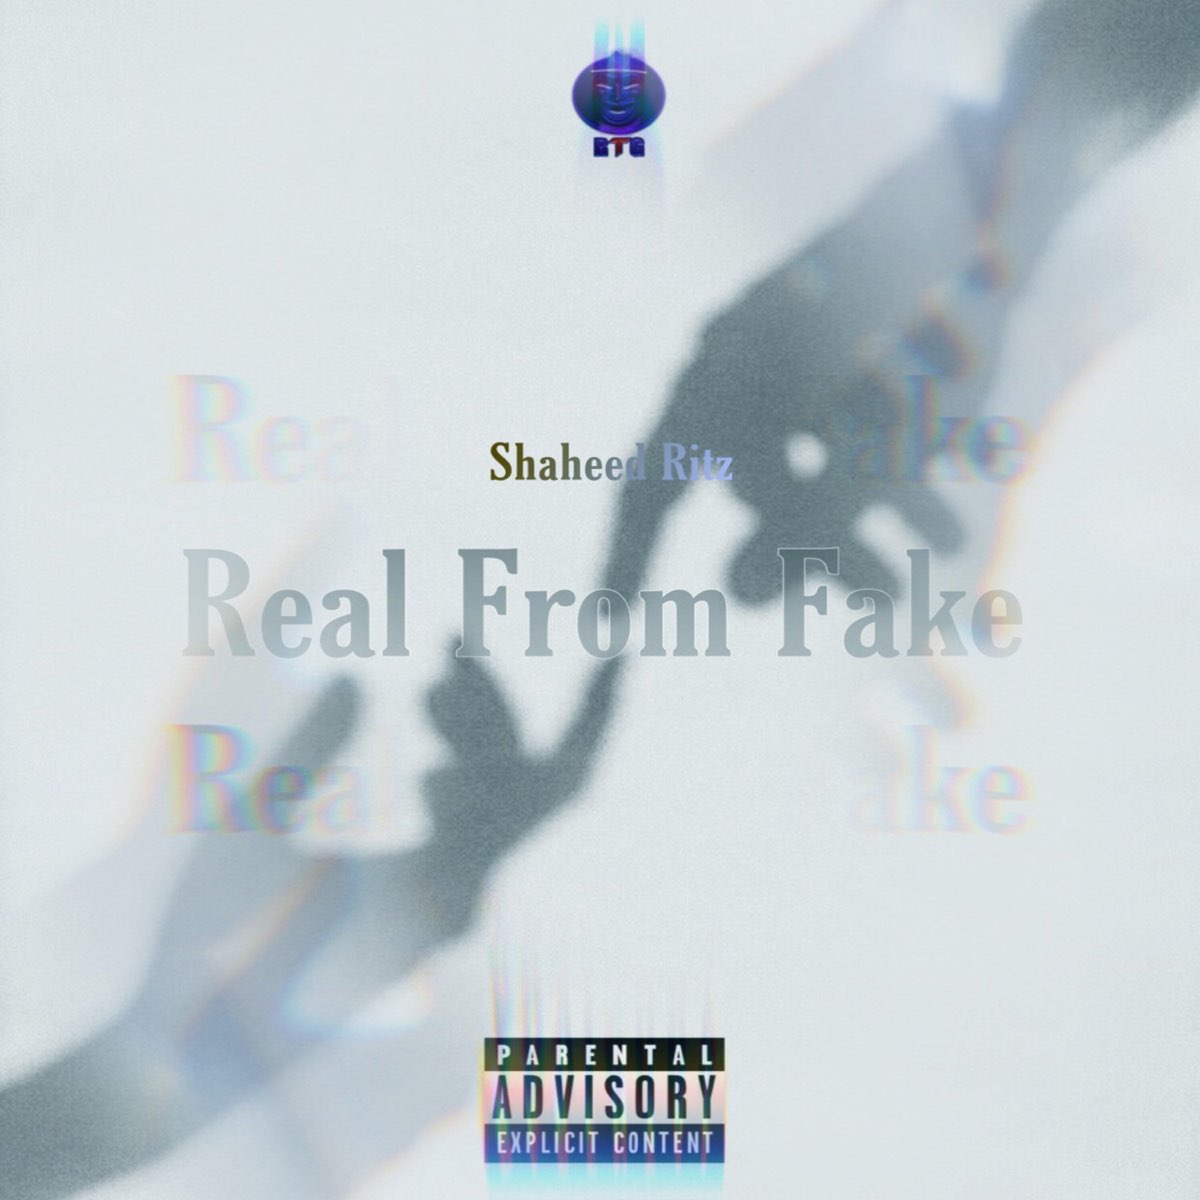 ‎Real From Fake - Single - Album by Shaheed Ritz - Apple Music